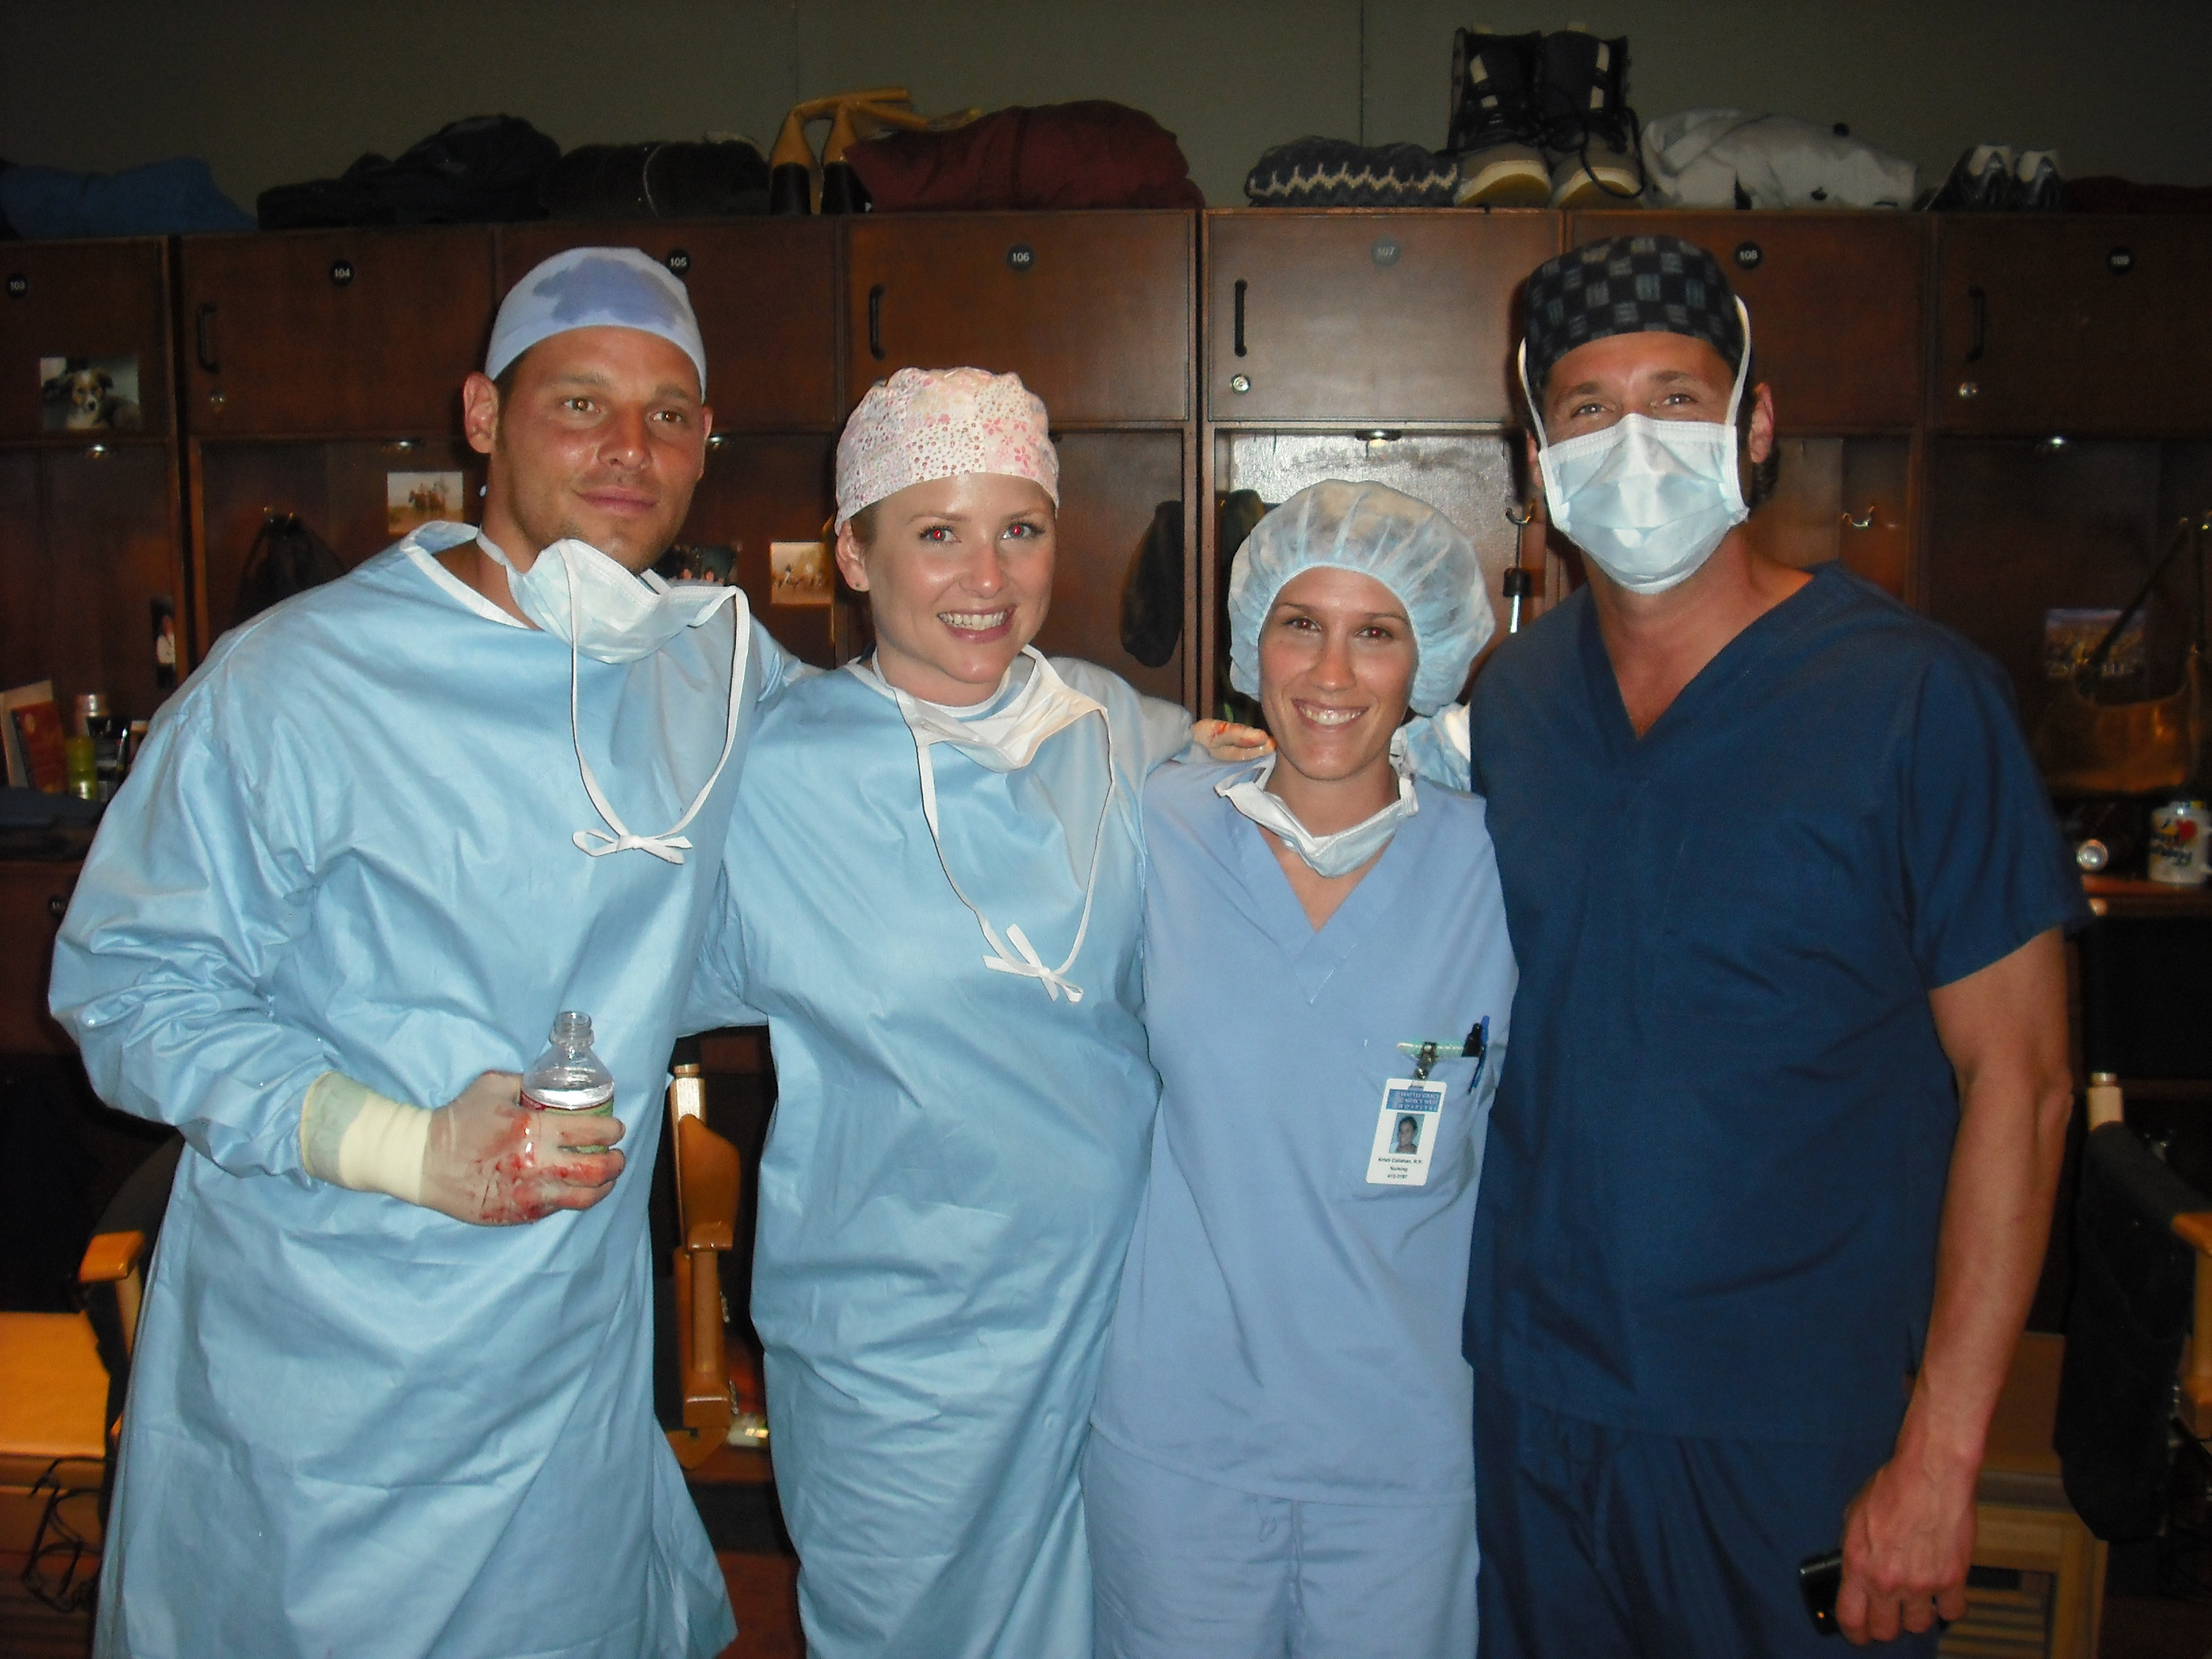 On set of Grey's Anatomy with Justin Chambers, Jessica Capshaw and Patrick Dempsey